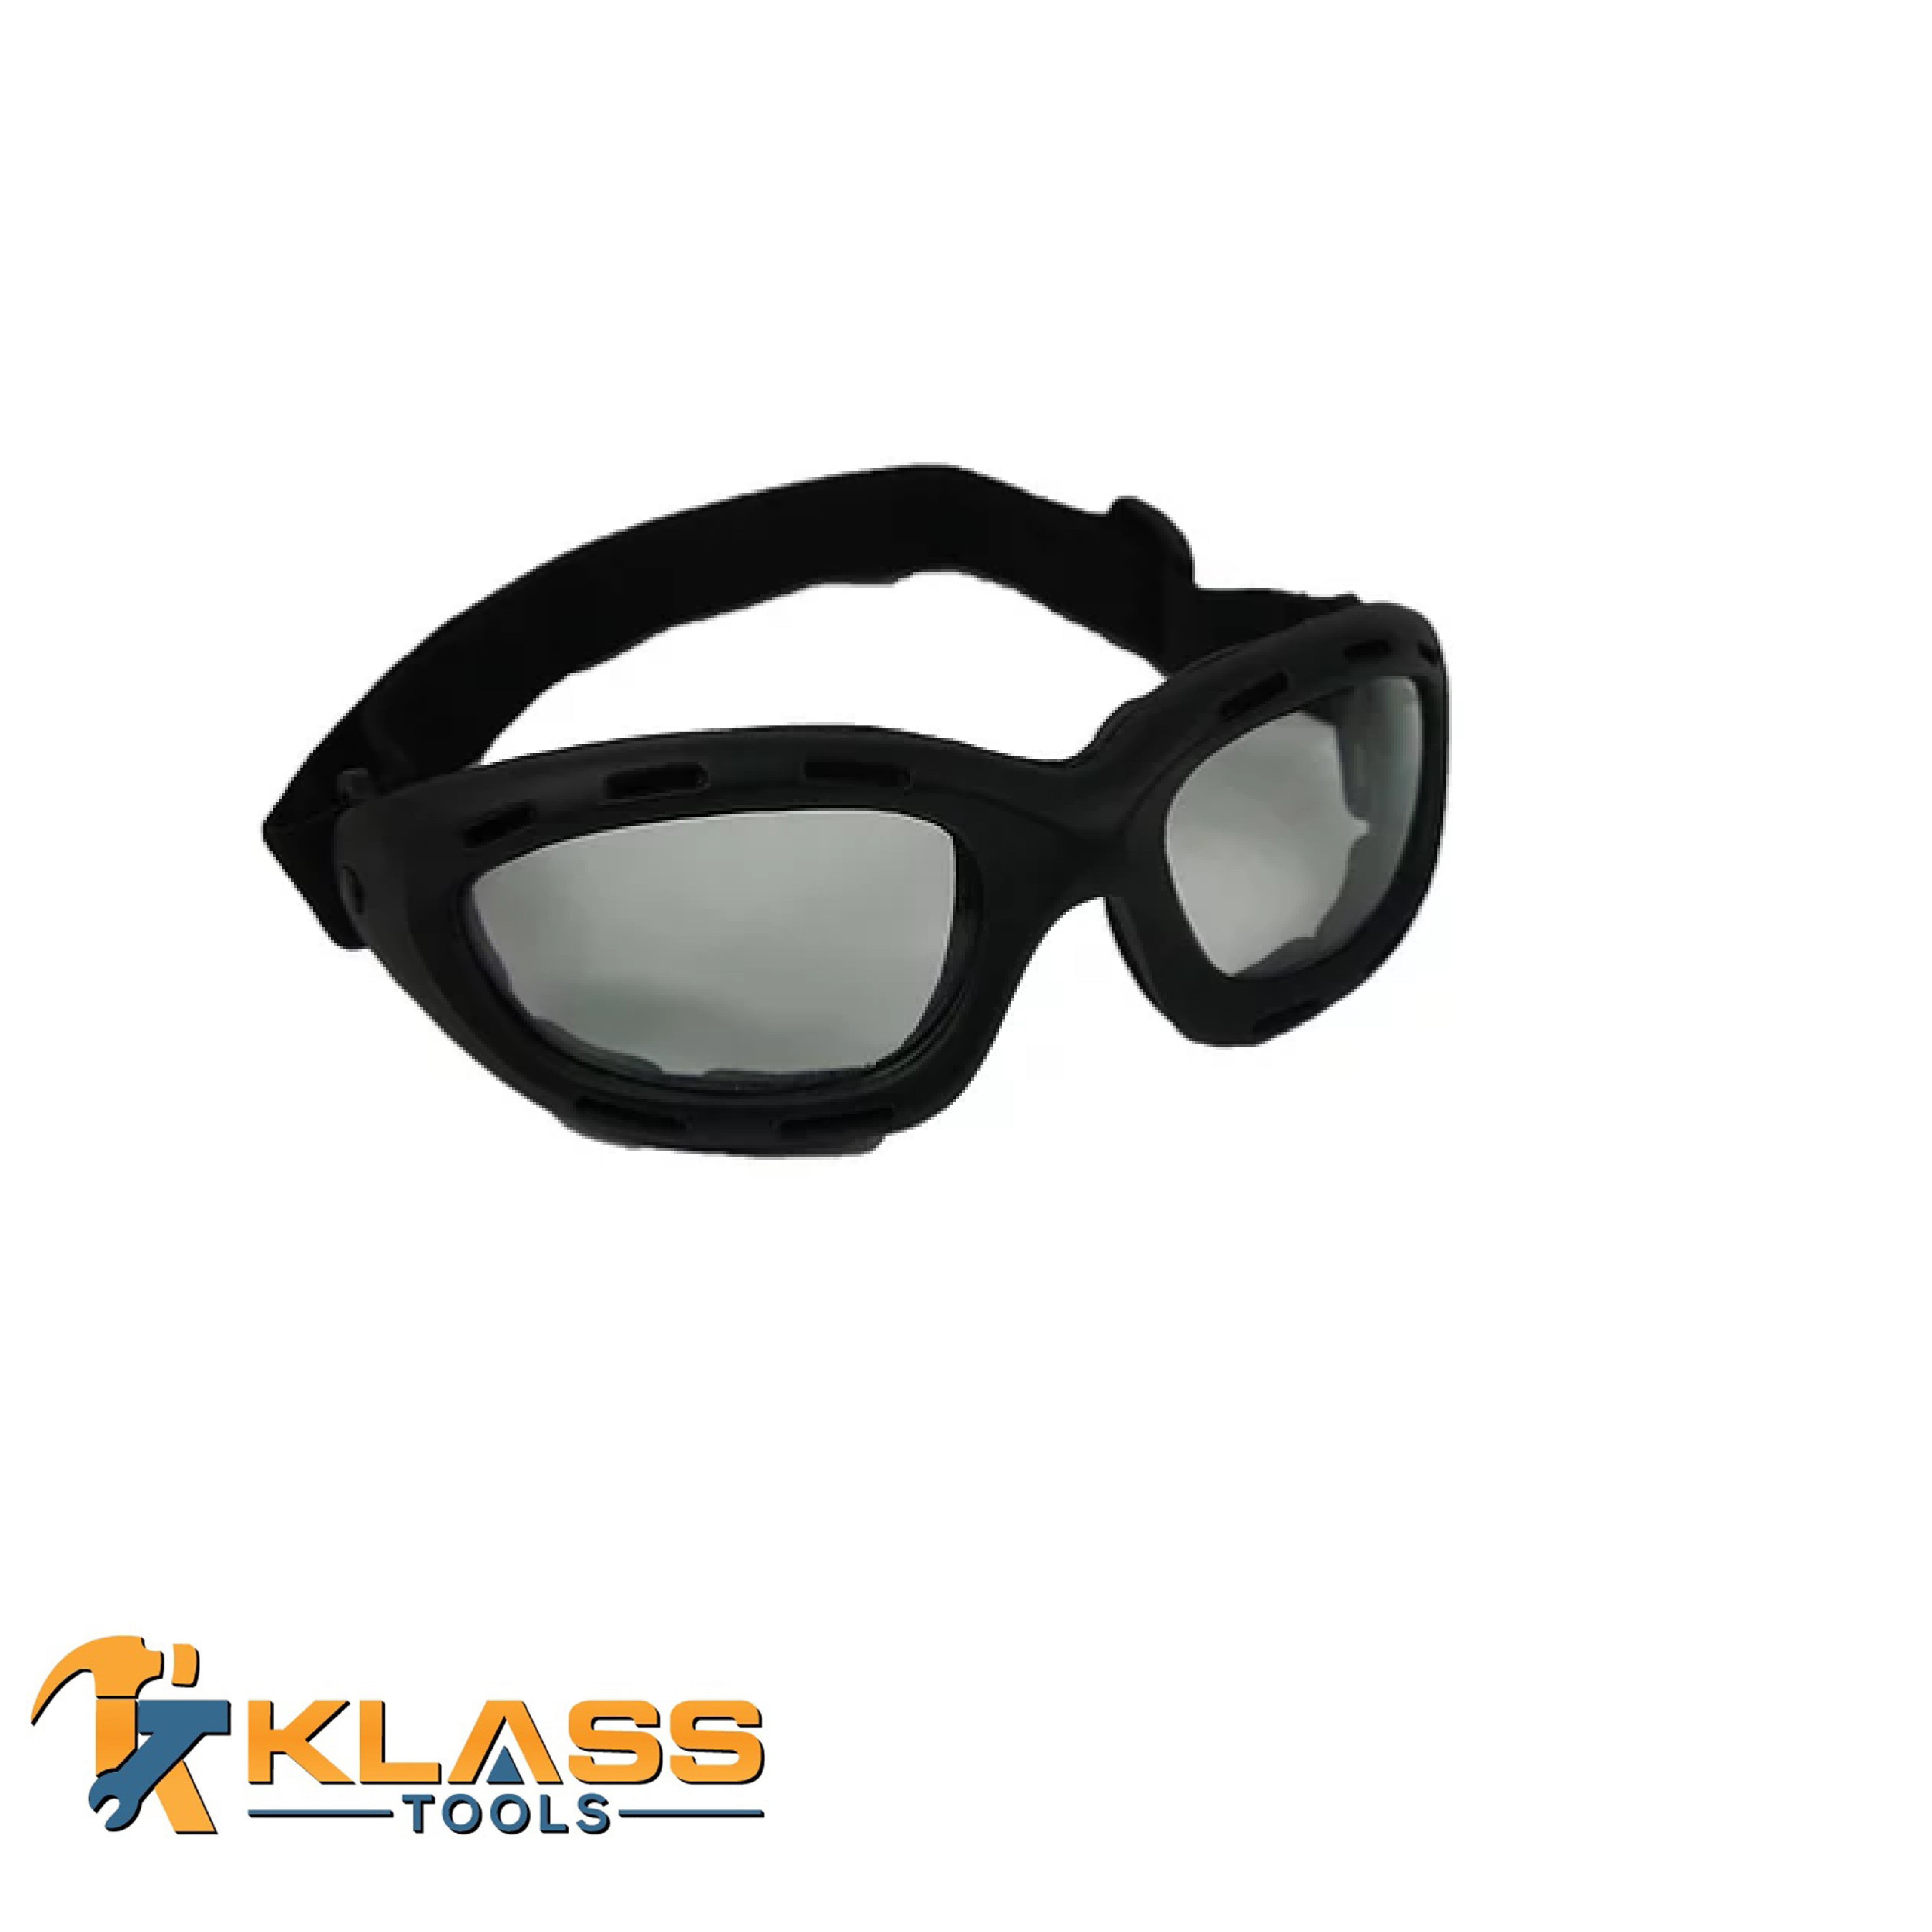 KlassTools Series 1000 Safety Glasses with Grey Lens 